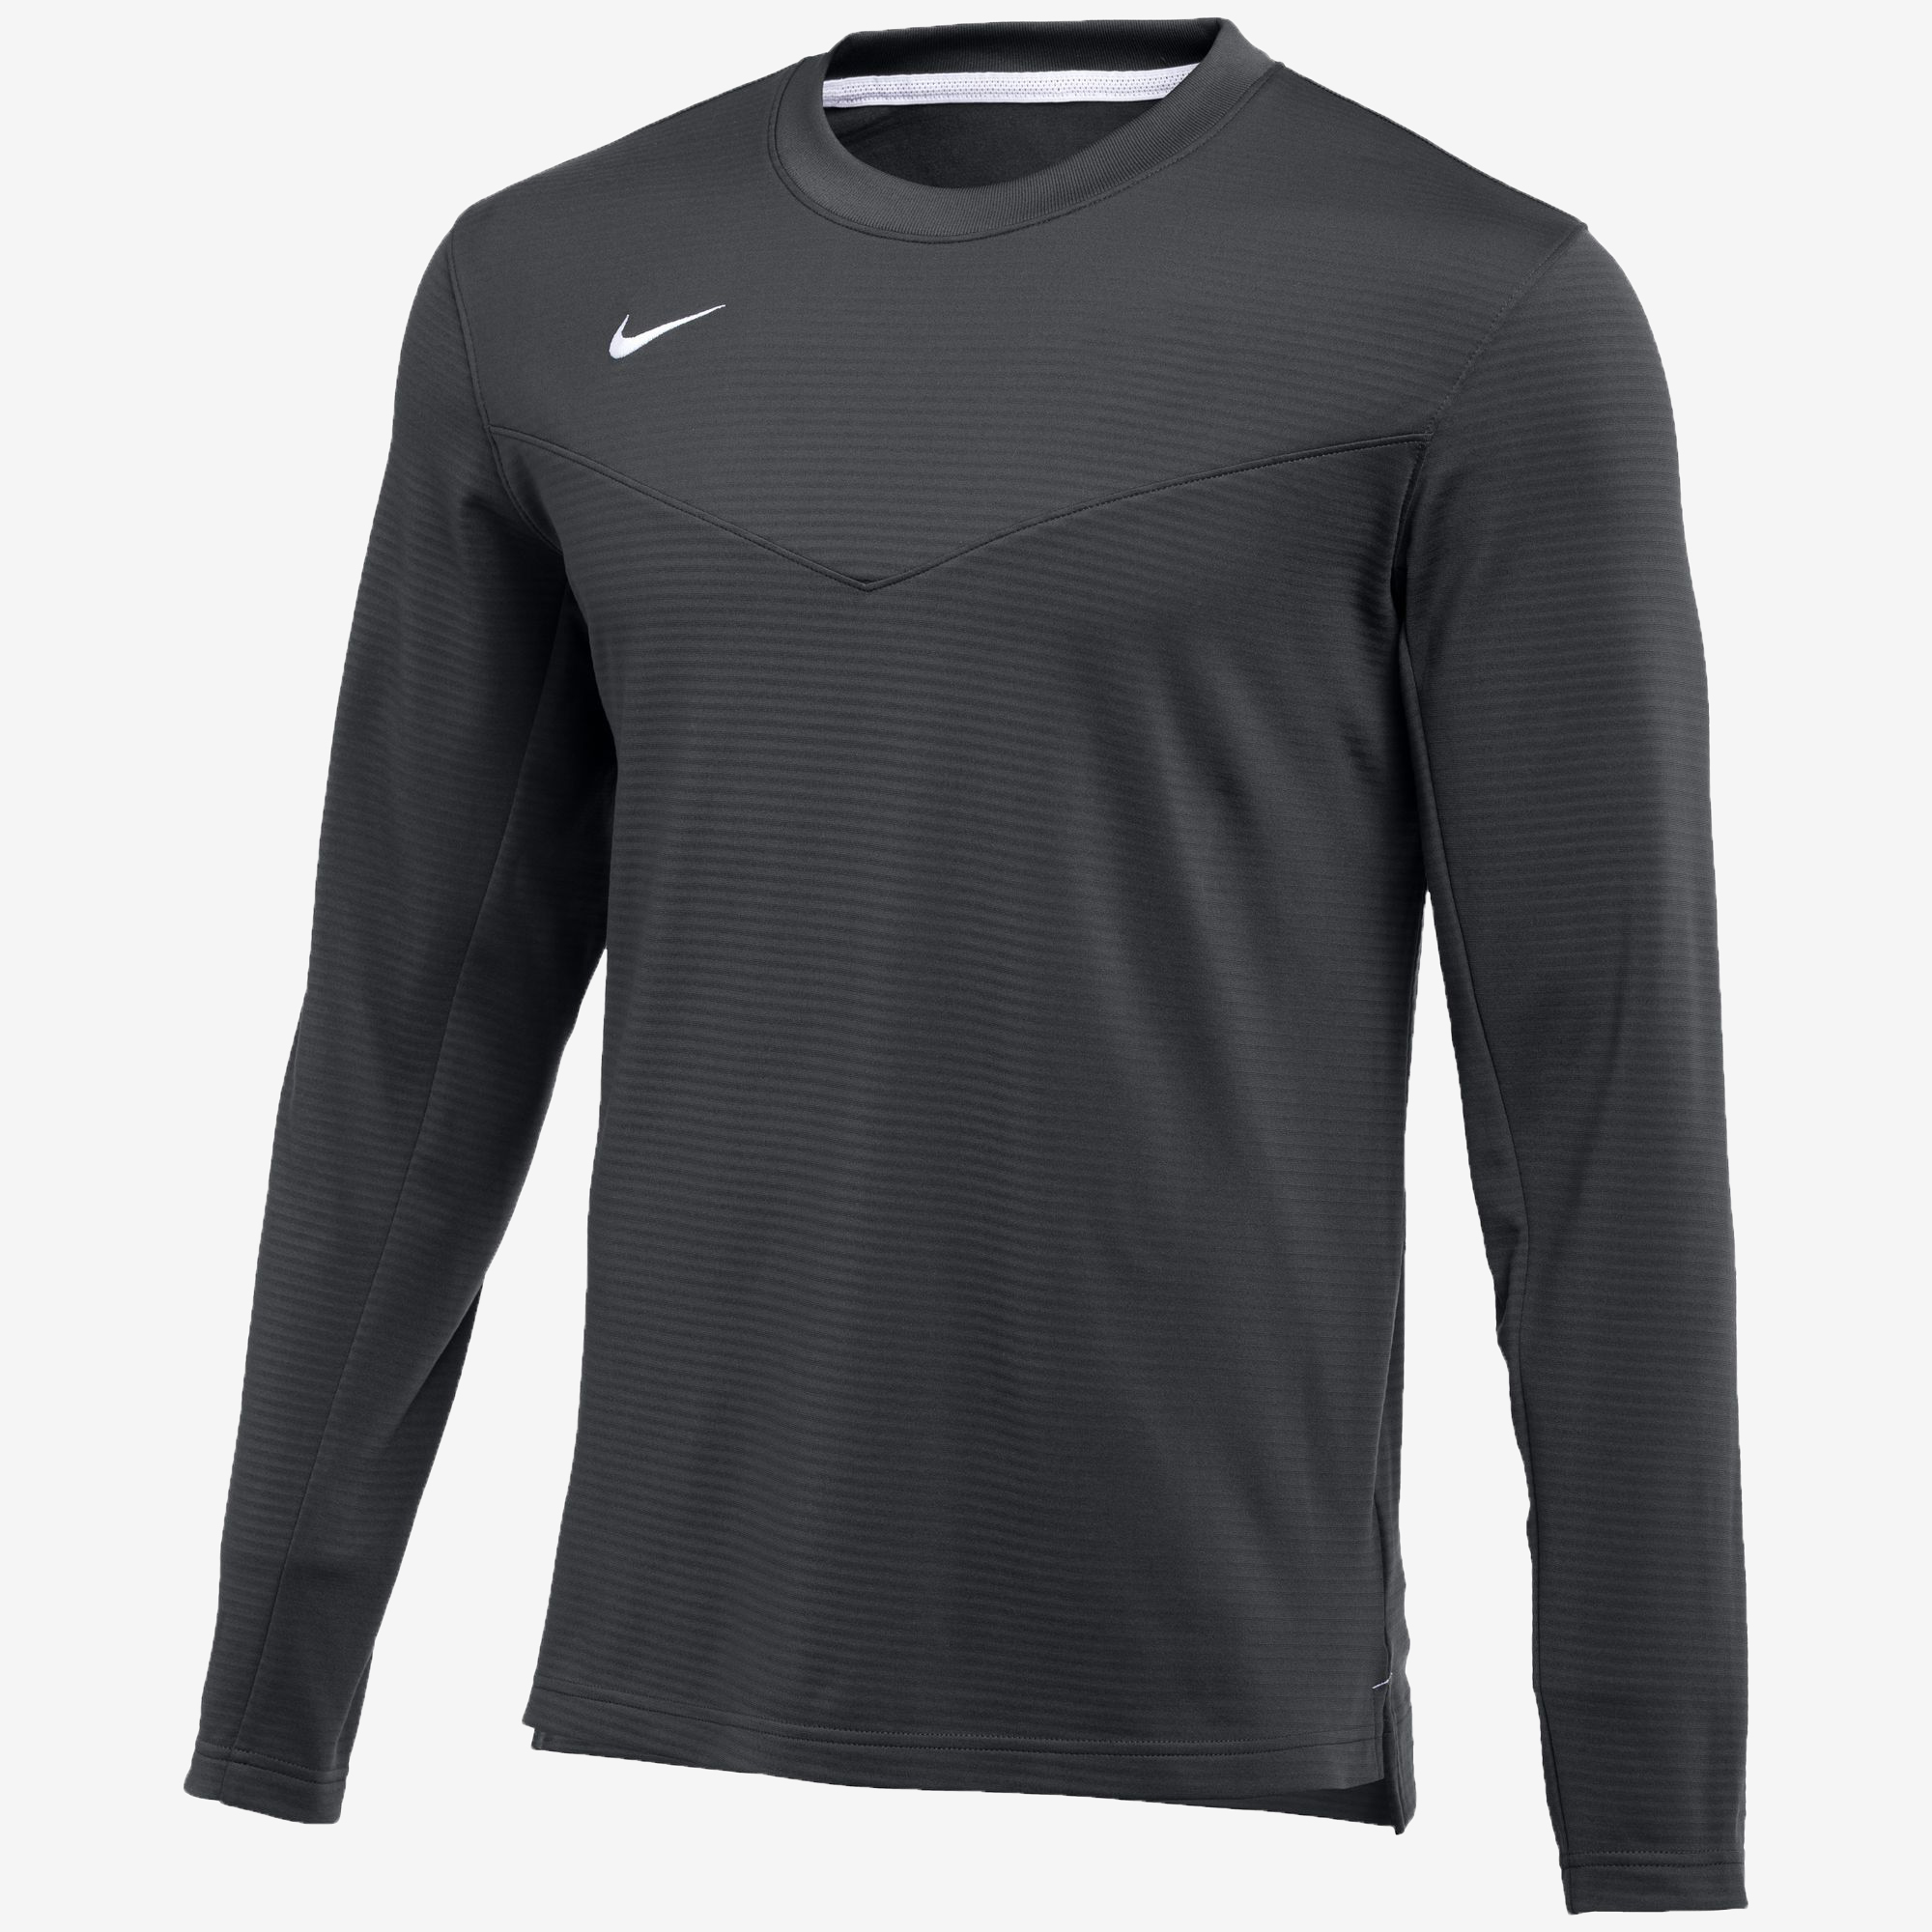 stefanssoccer.com:Nike Dry-FIT Long Sleeve Crew Top - Anthracite